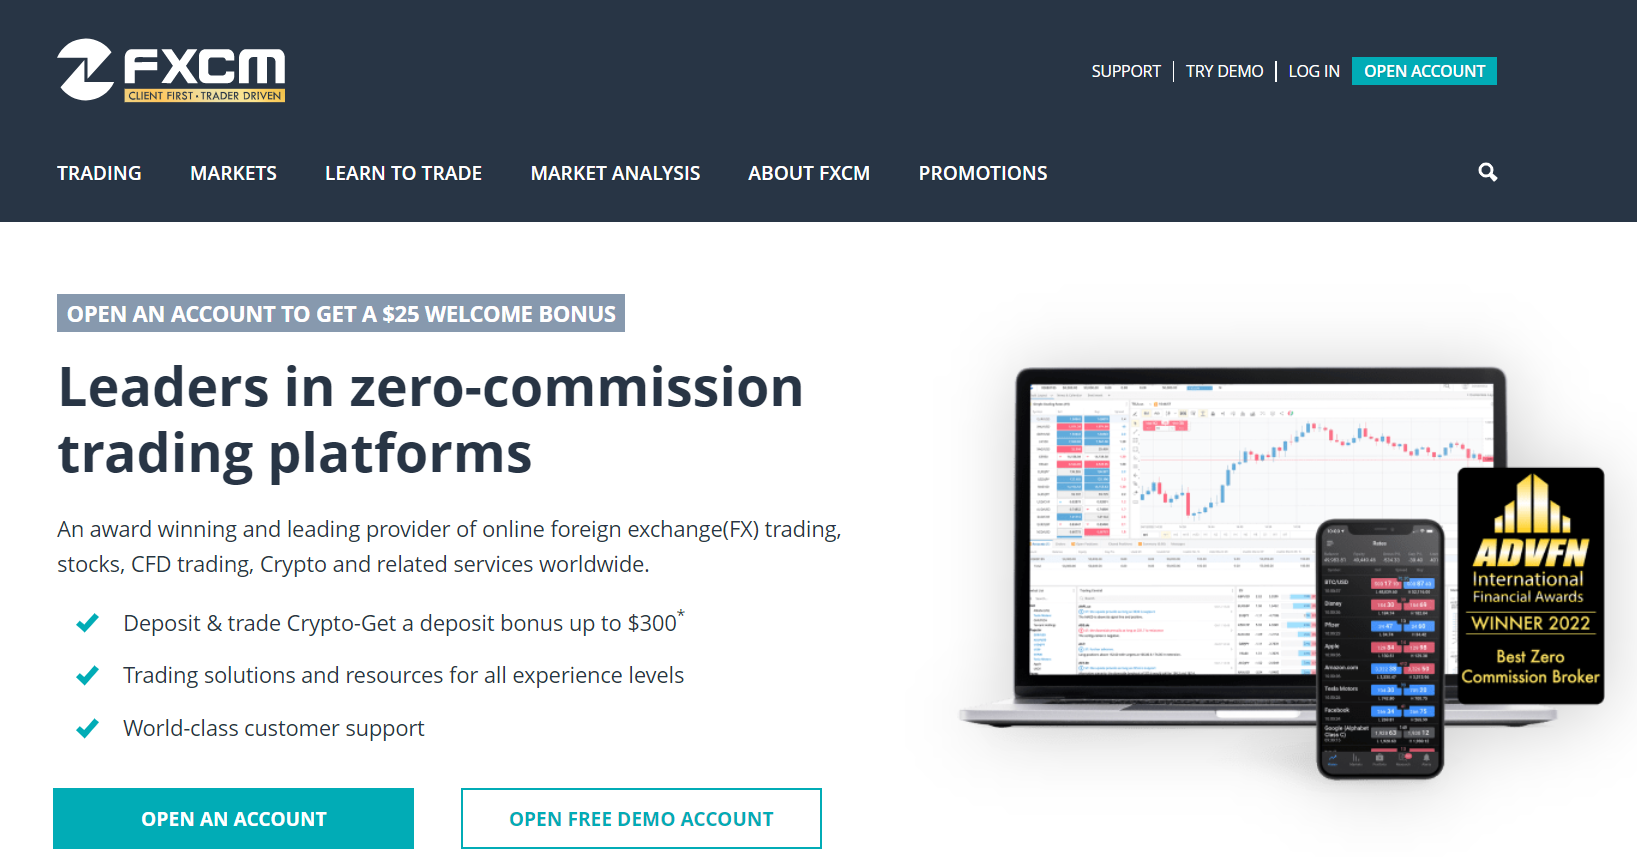 FXCM is CFD regulated broker which offers different kind of assets.